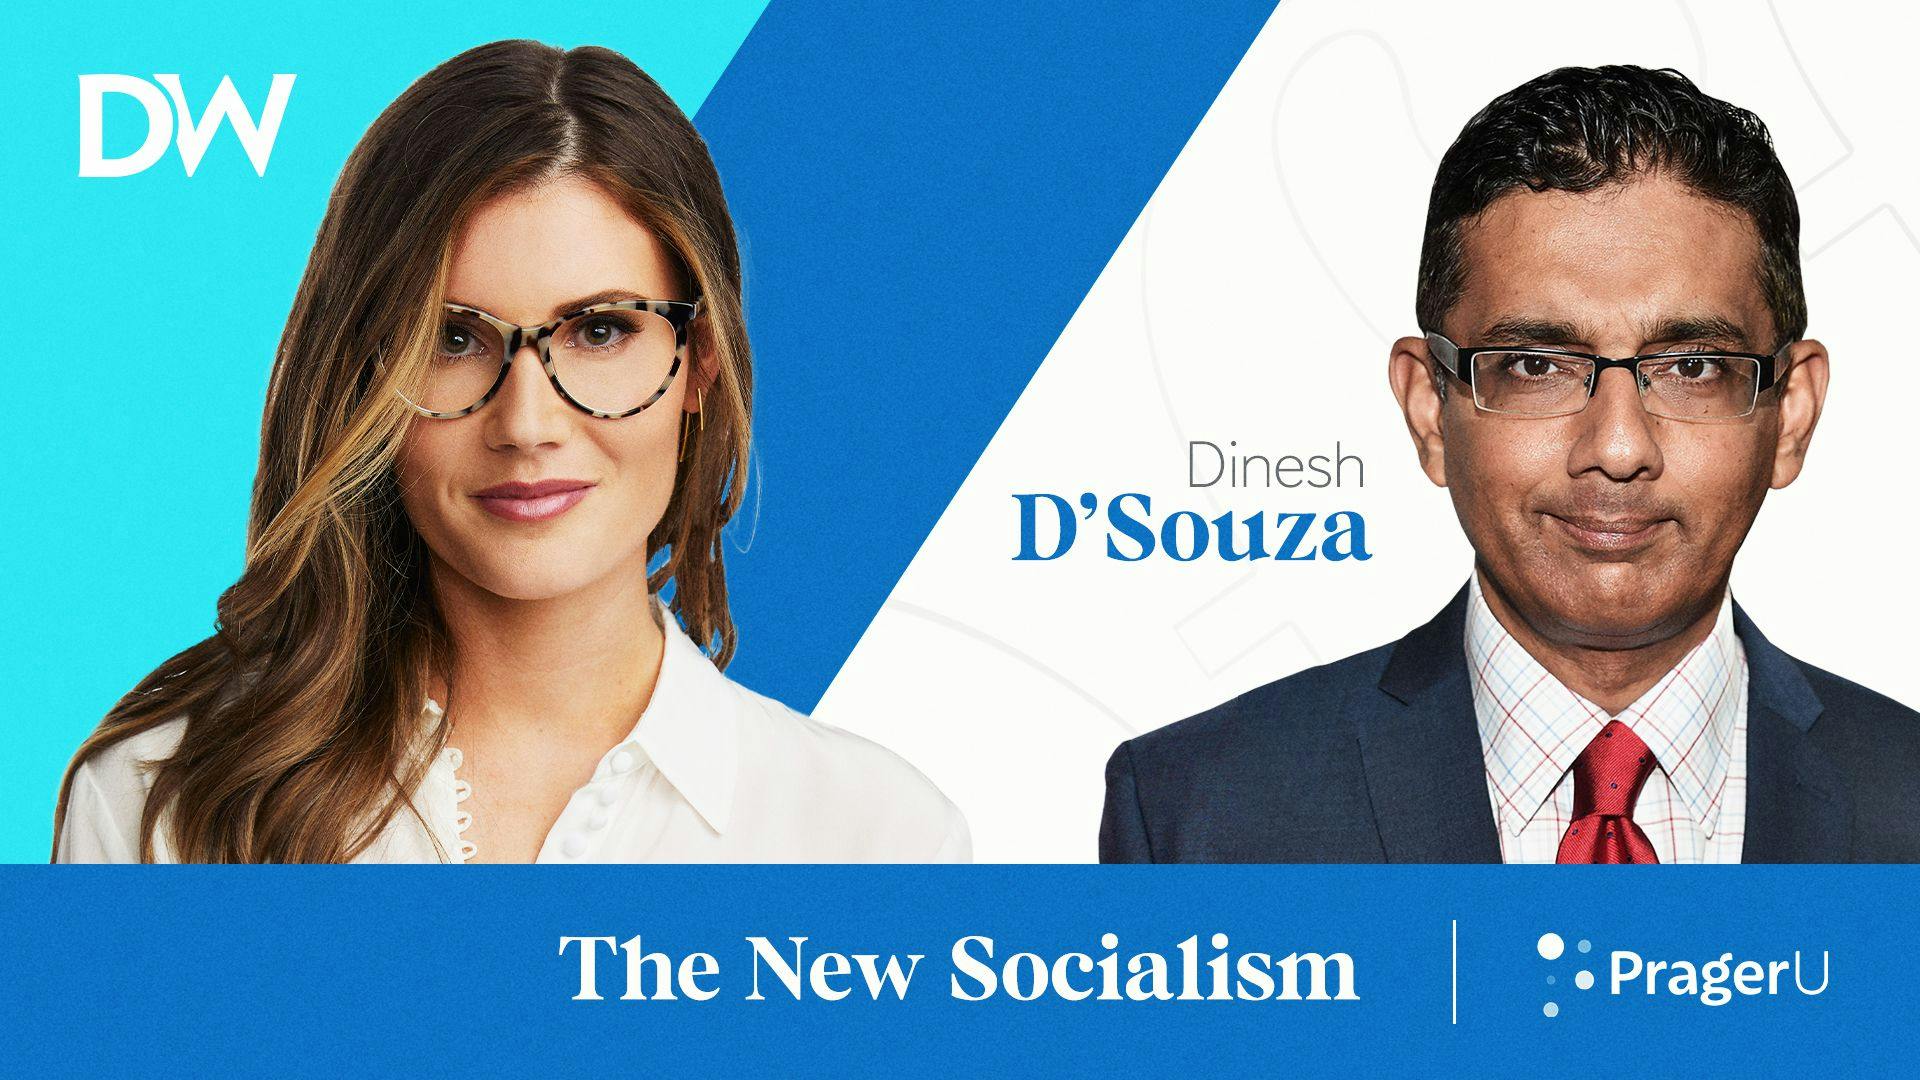 The New Socialism with Dinesh D’Souza